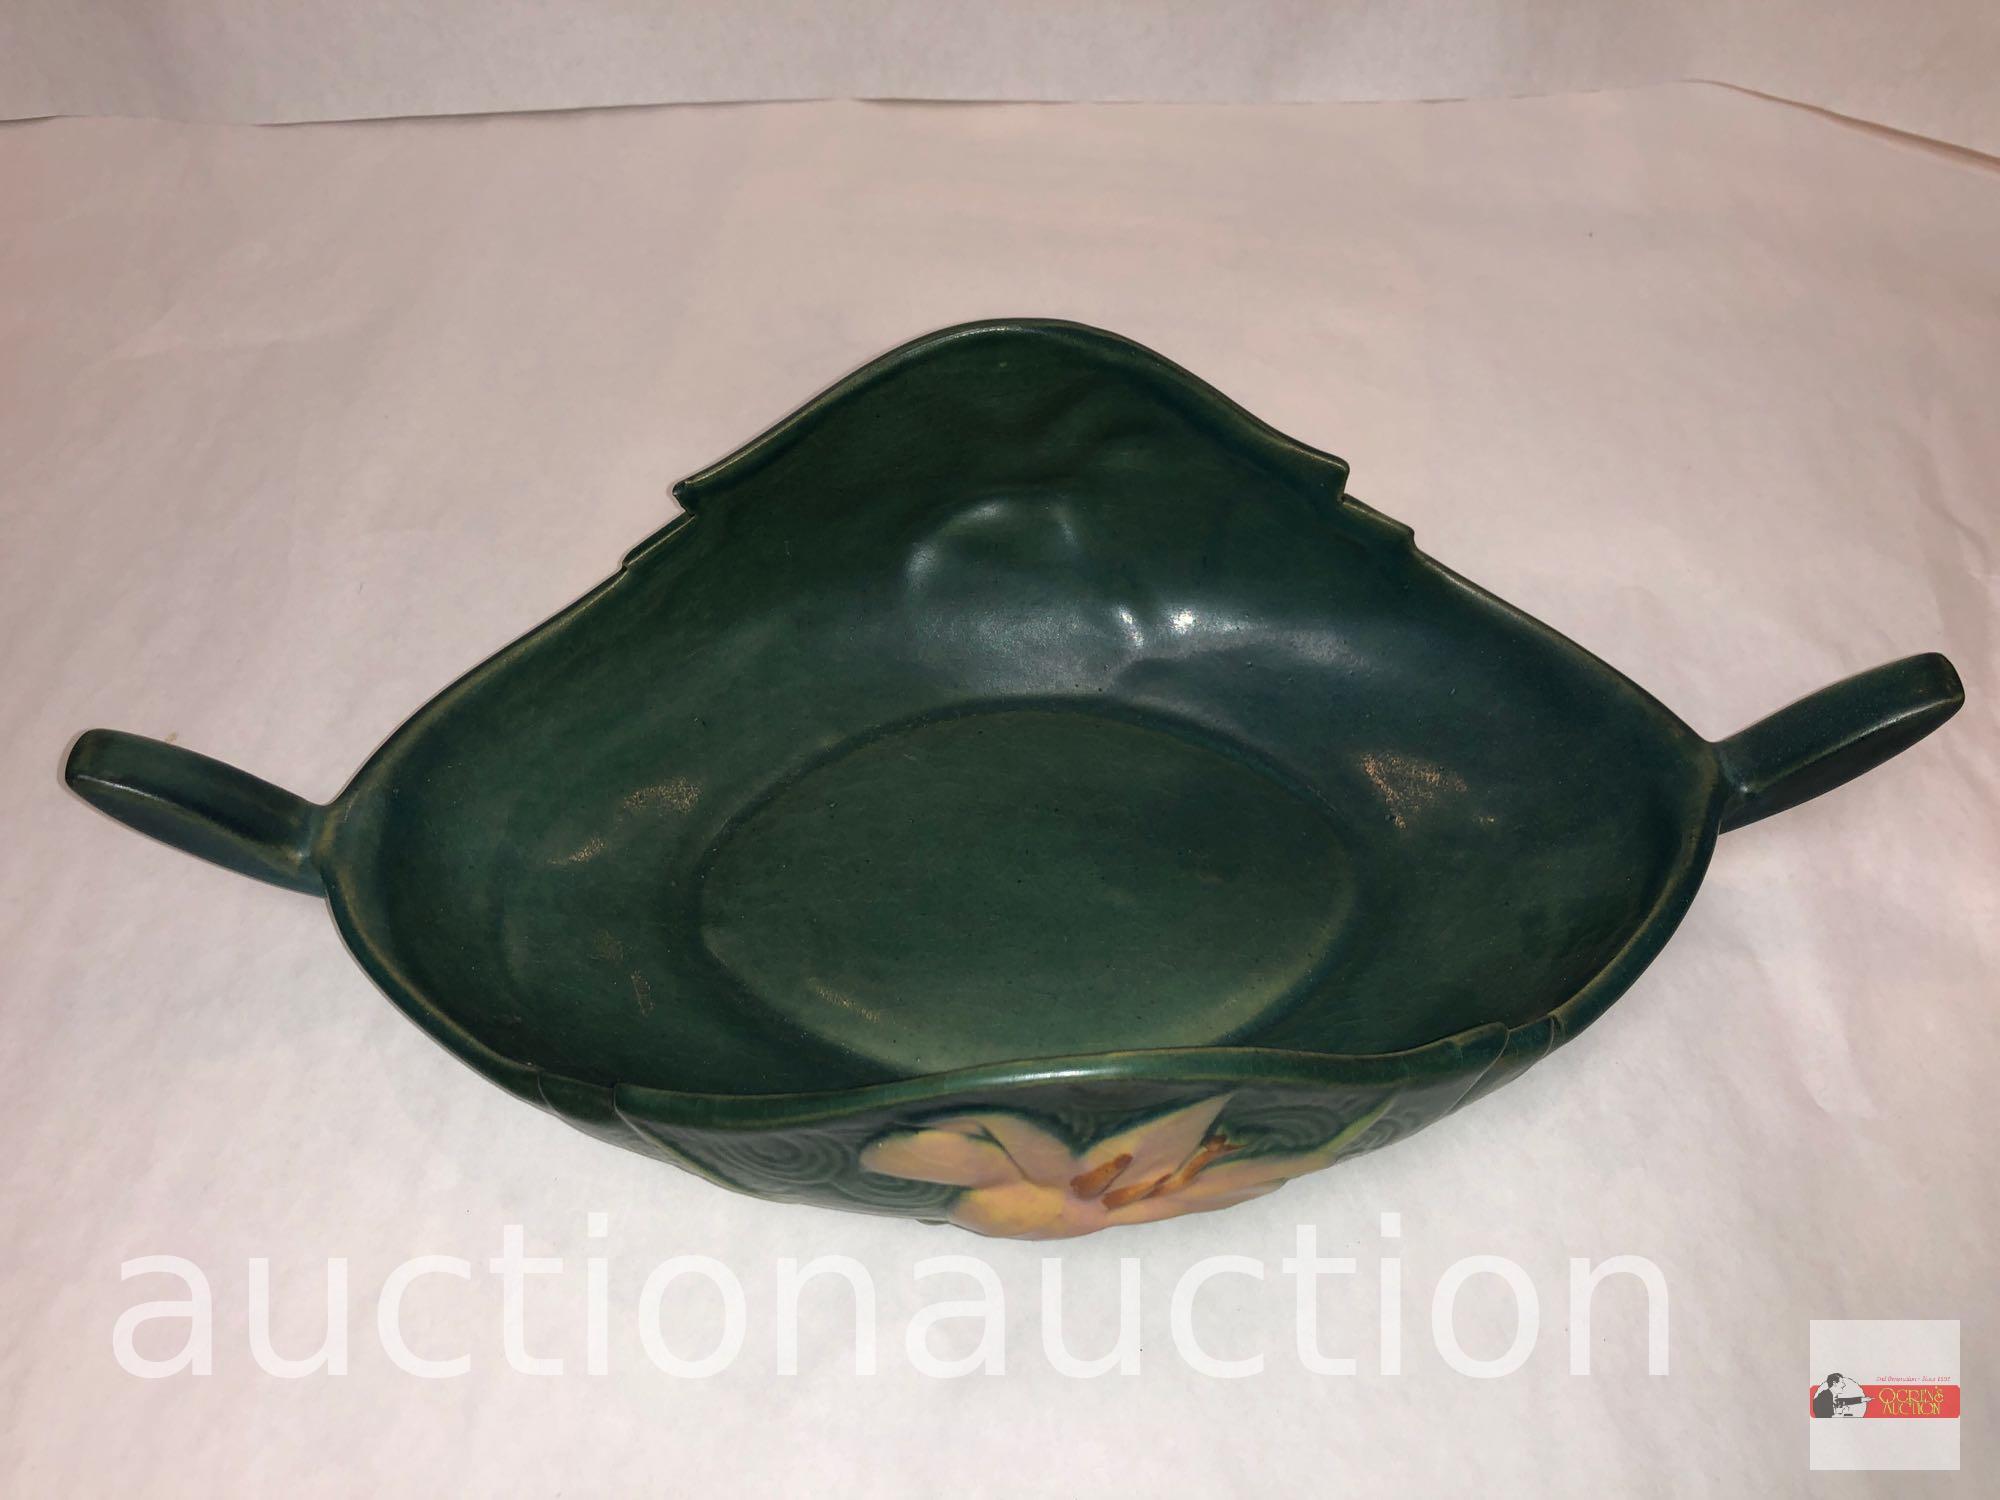 Roseville Pottery - 1946 Zephyr Lily console bowl, #475-10, green, 14"wx7"dx3.75"h